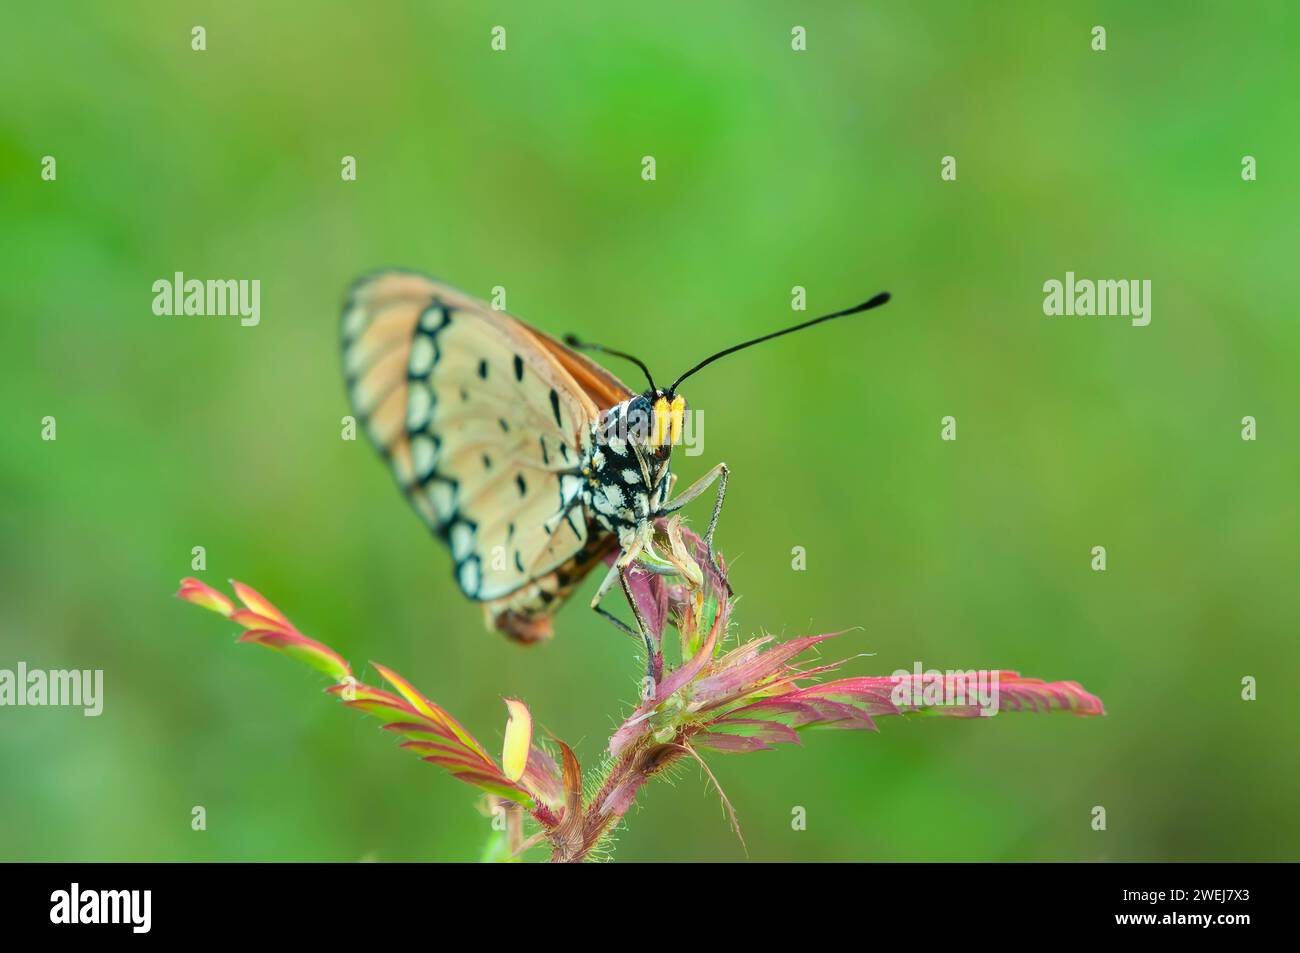 An Orange Butterfly Acraea terpsicore perched in branch of the tree Stock Photo